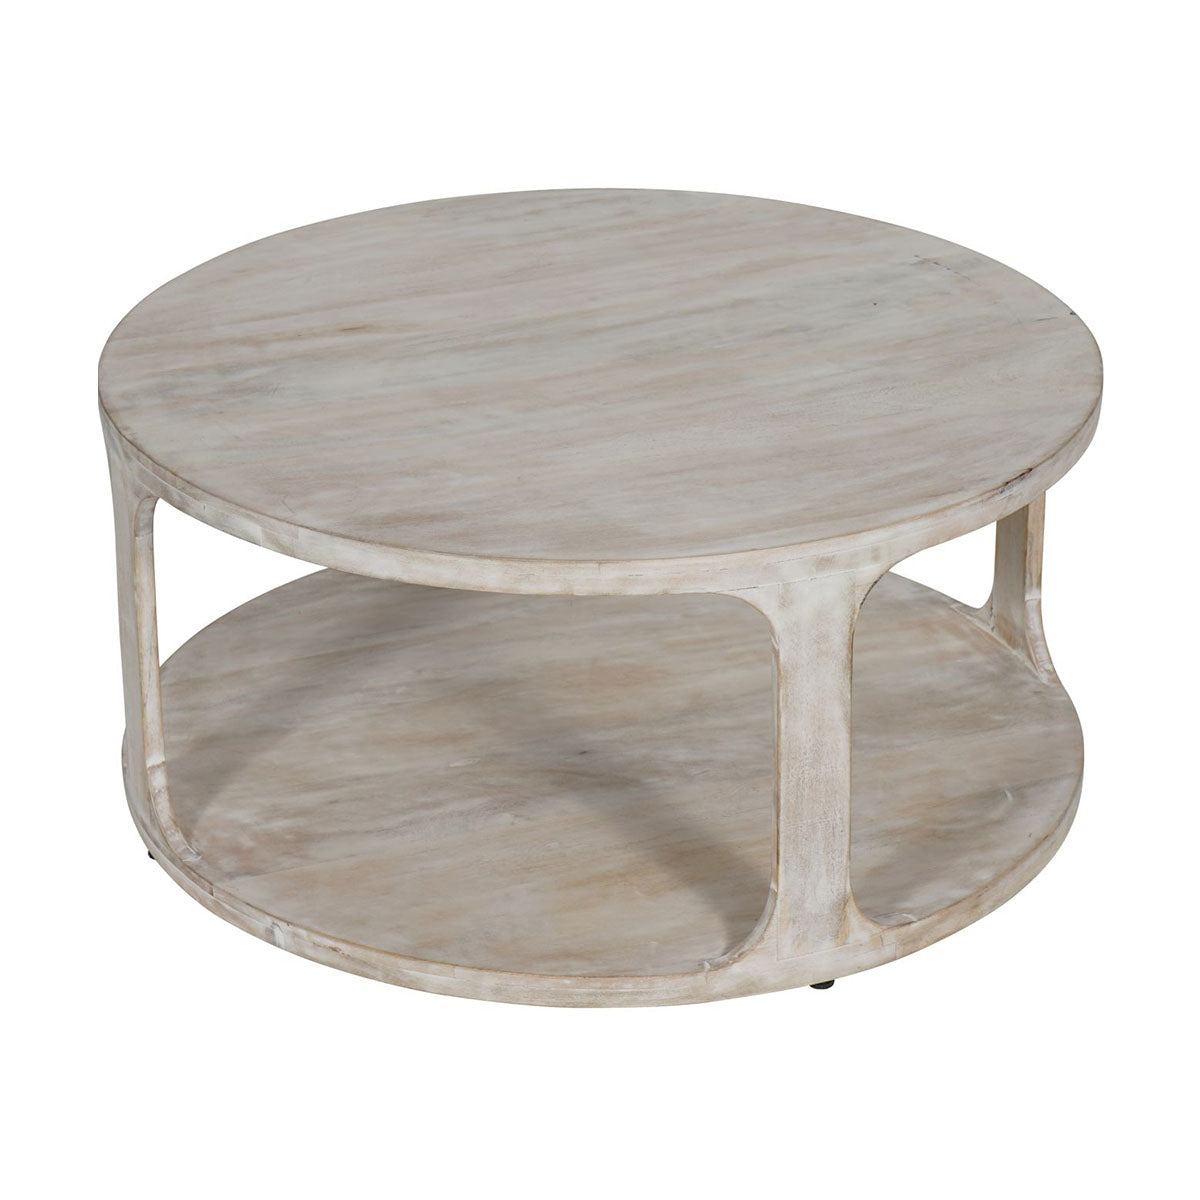 Beadnell Solid Carved Wooden Coffee Table in Whitewash Finish